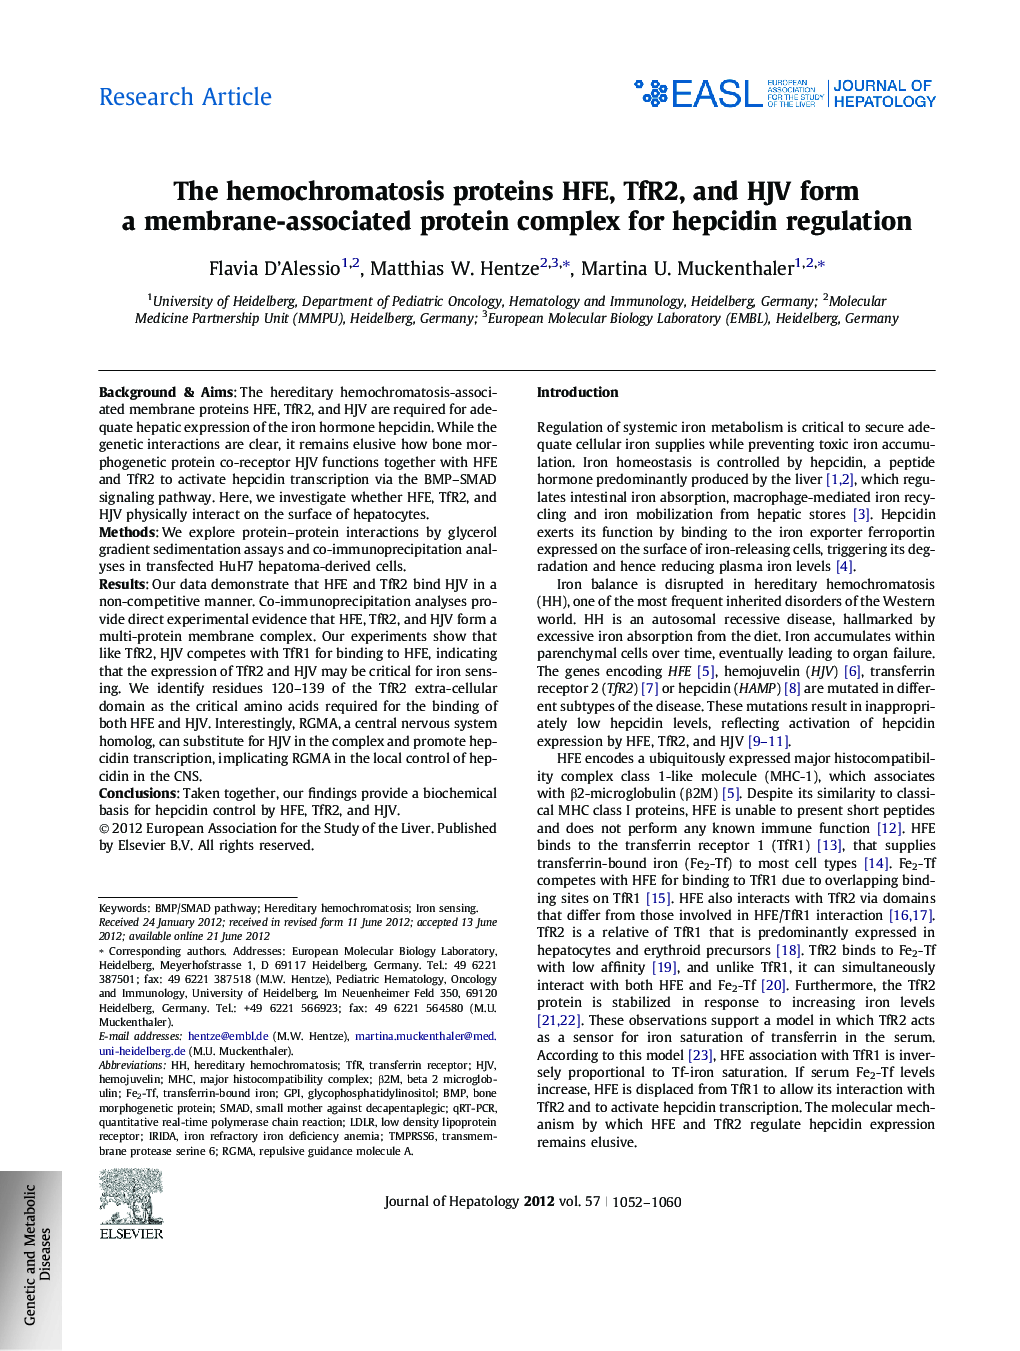 Research ArticleThe hemochromatosis proteins HFE, TfR2, and HJV form a membrane-associated protein complex for hepcidin regulation